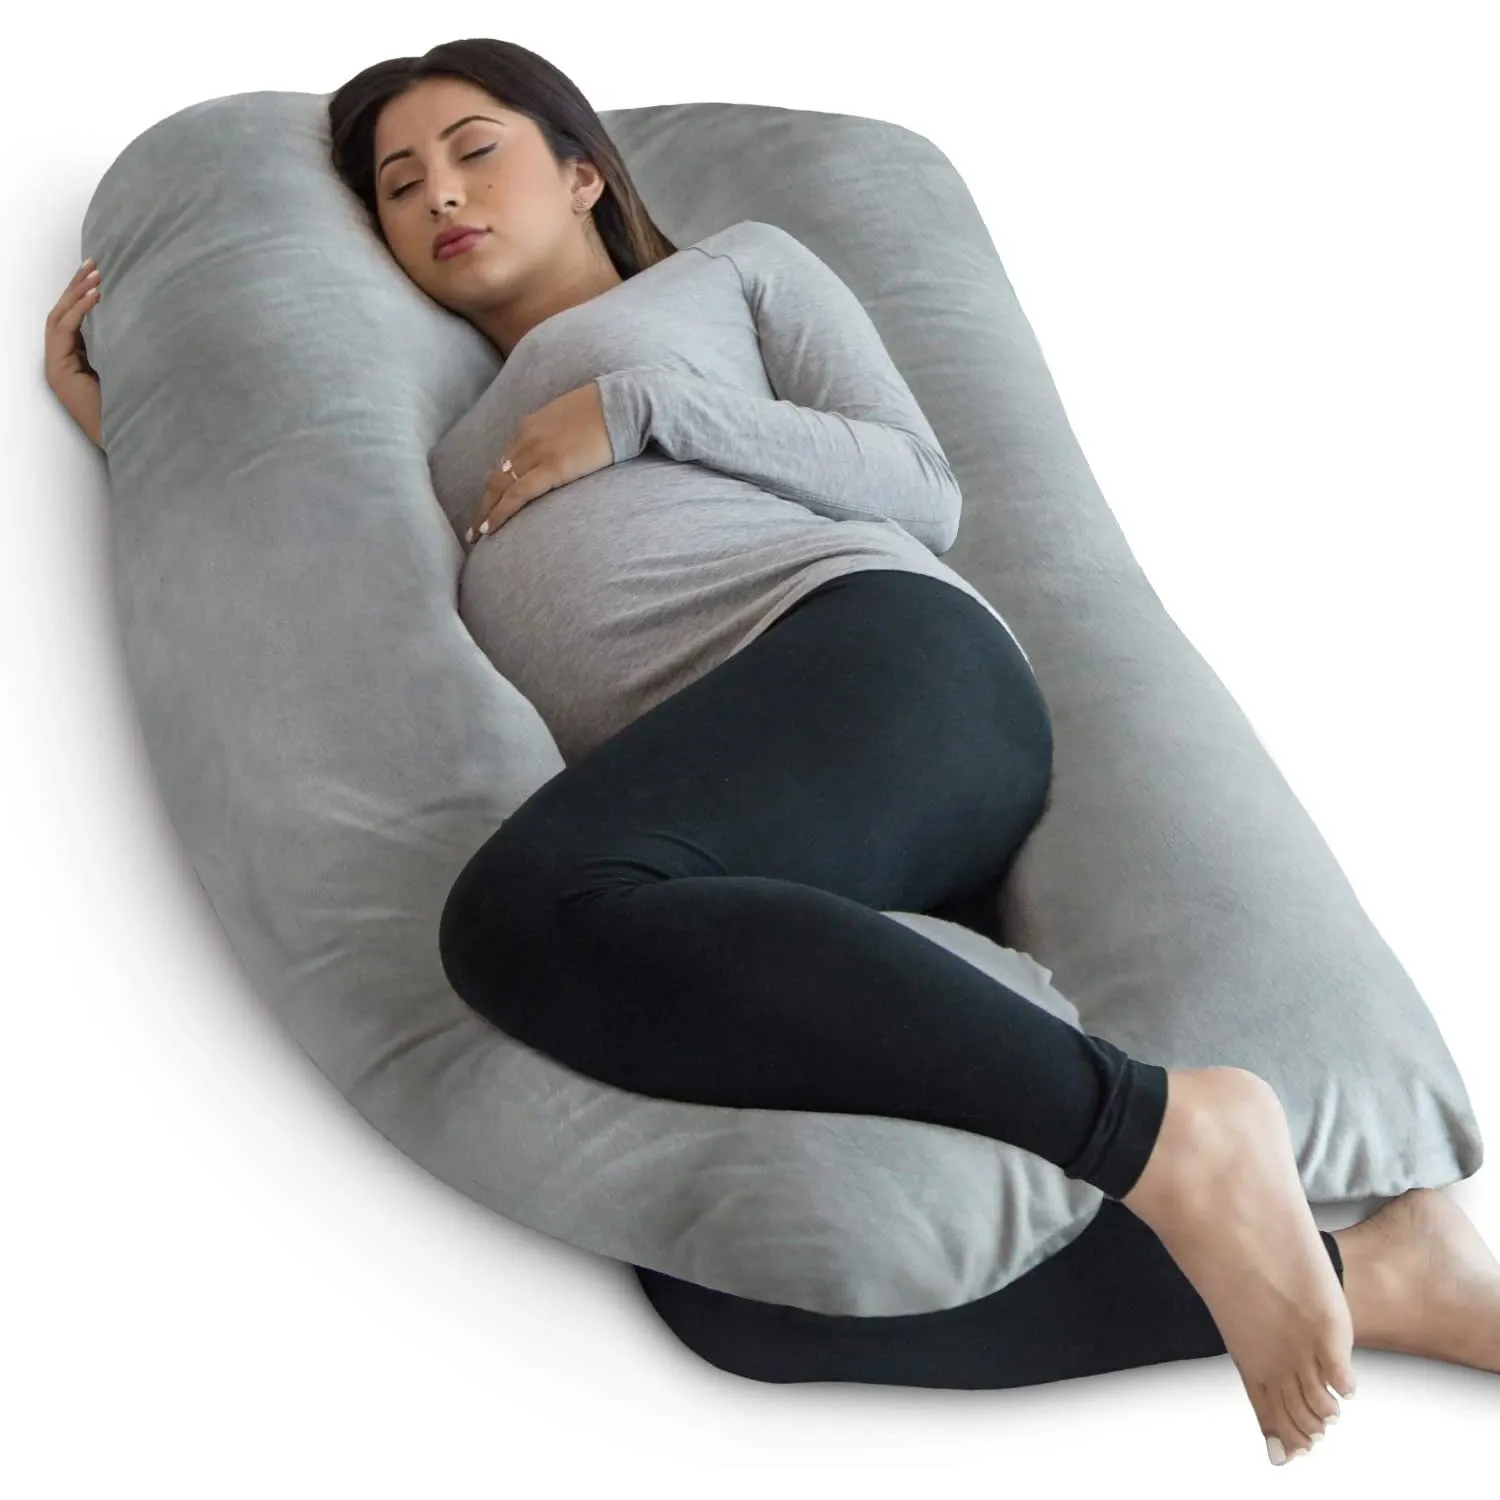 Adjustable Full Body Belly Support Maternity Pregnancy Pillow For Sale For Baby U Body Pillow For Pregnant Women